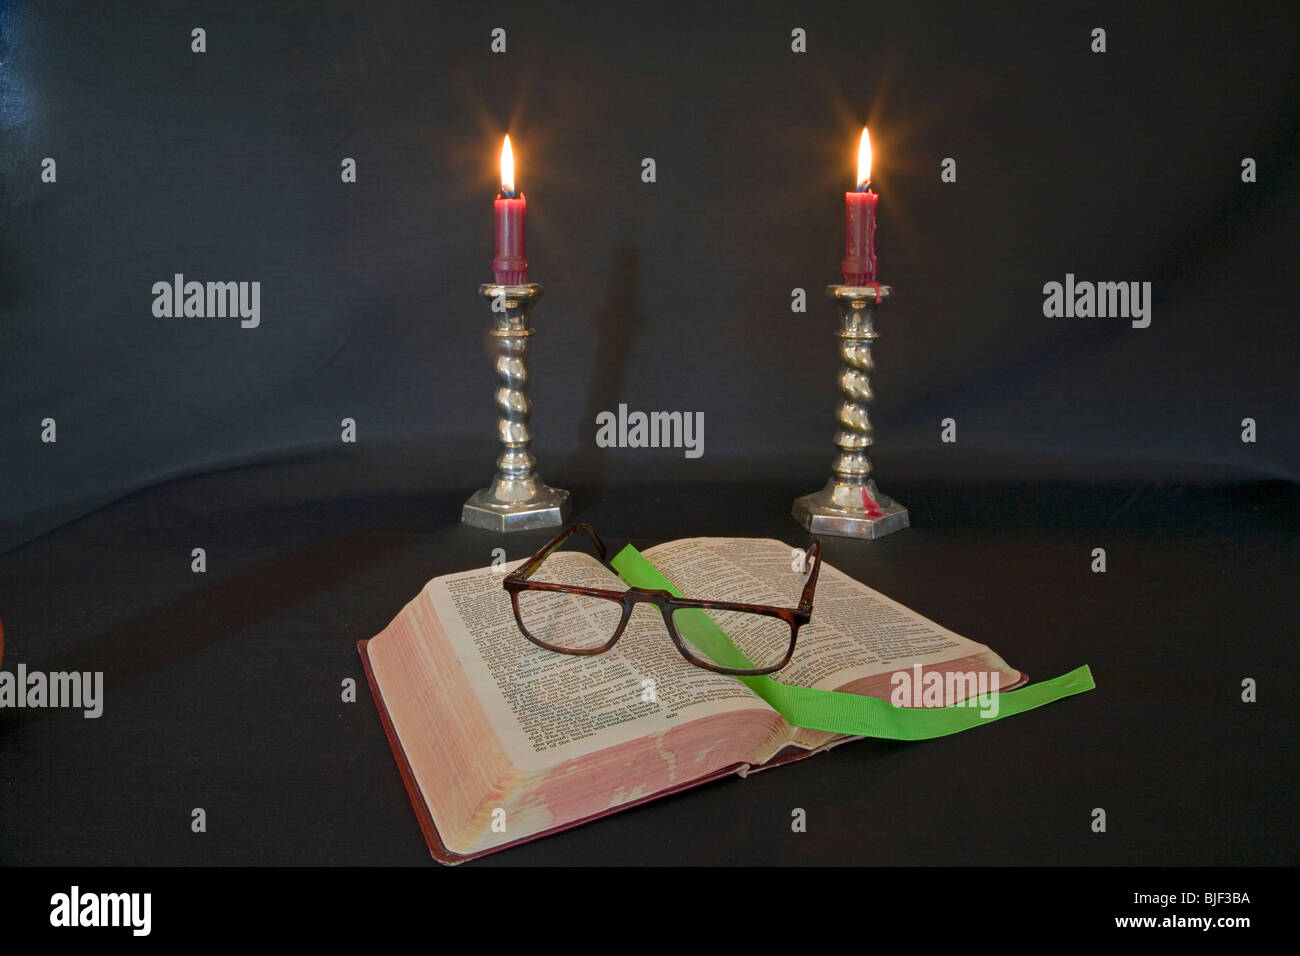 Lighted candles, reading glasses, and a good book. Stock Photo